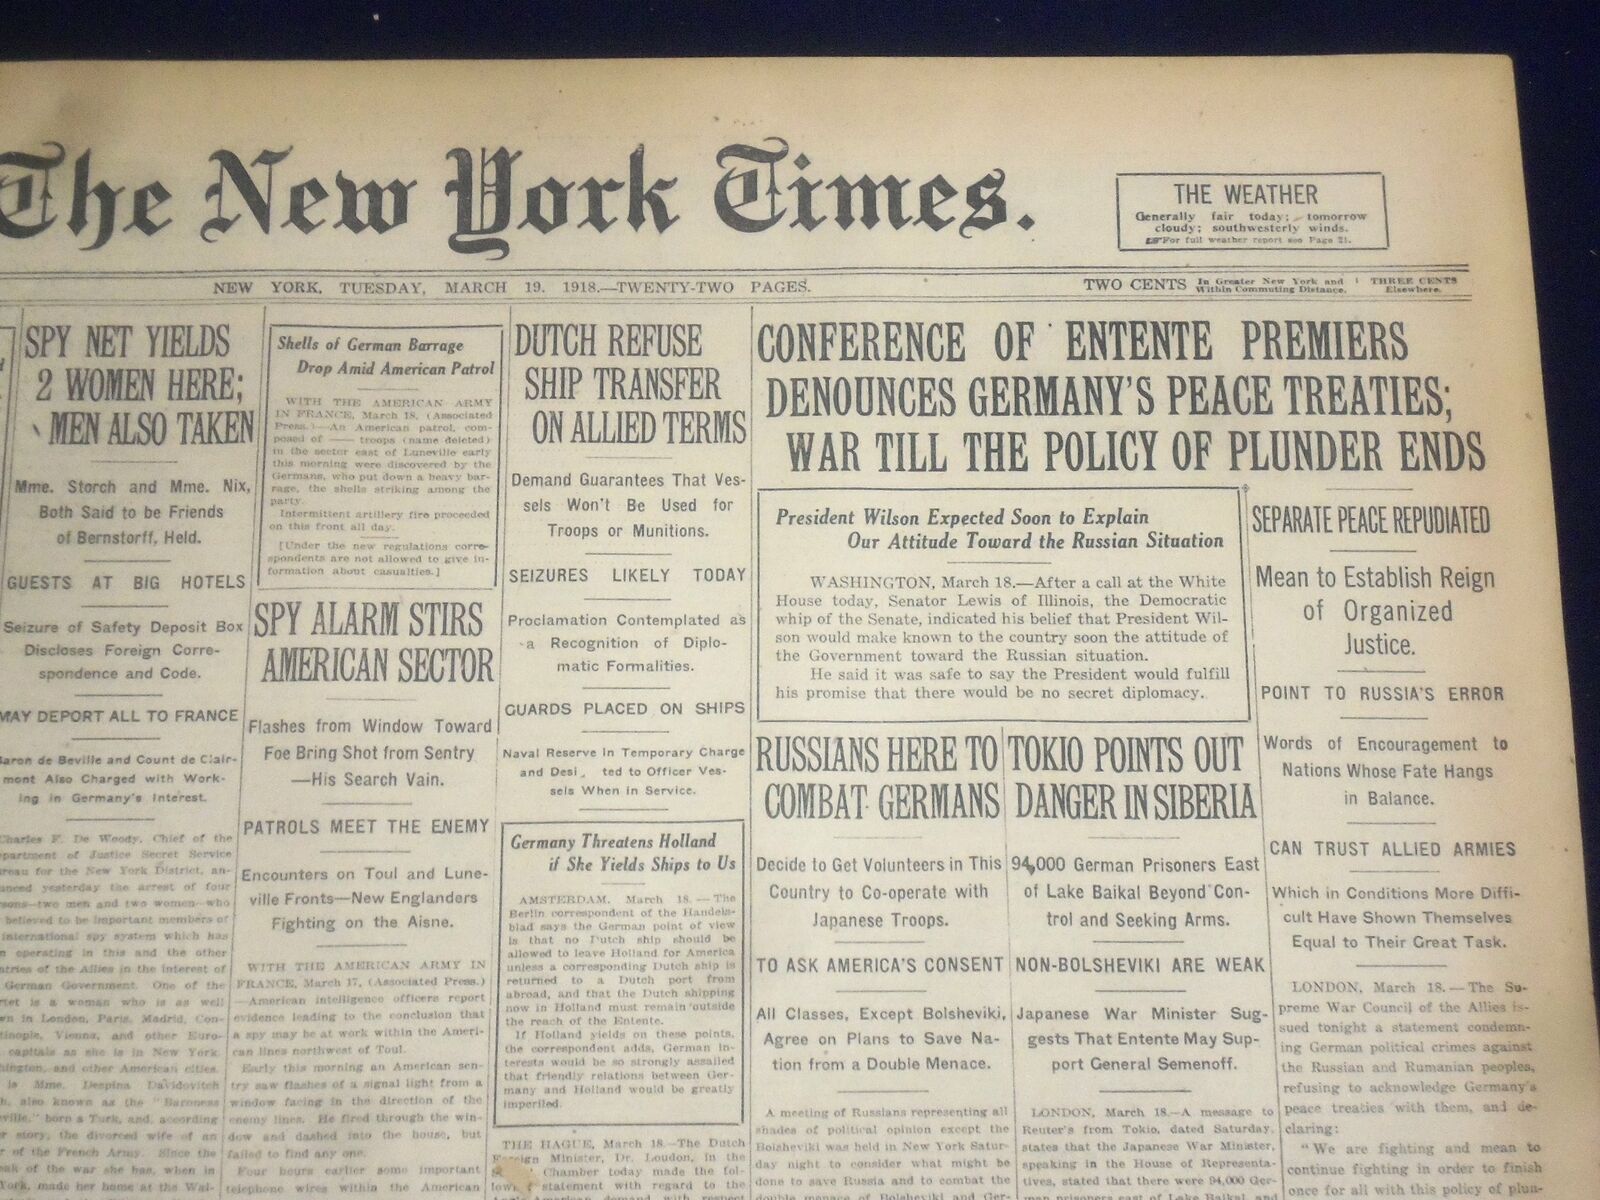 1918 MARCH 19 NEW YORK TIMES - GERMANY PEACE TREATIES DENOUNCED - NT 8166